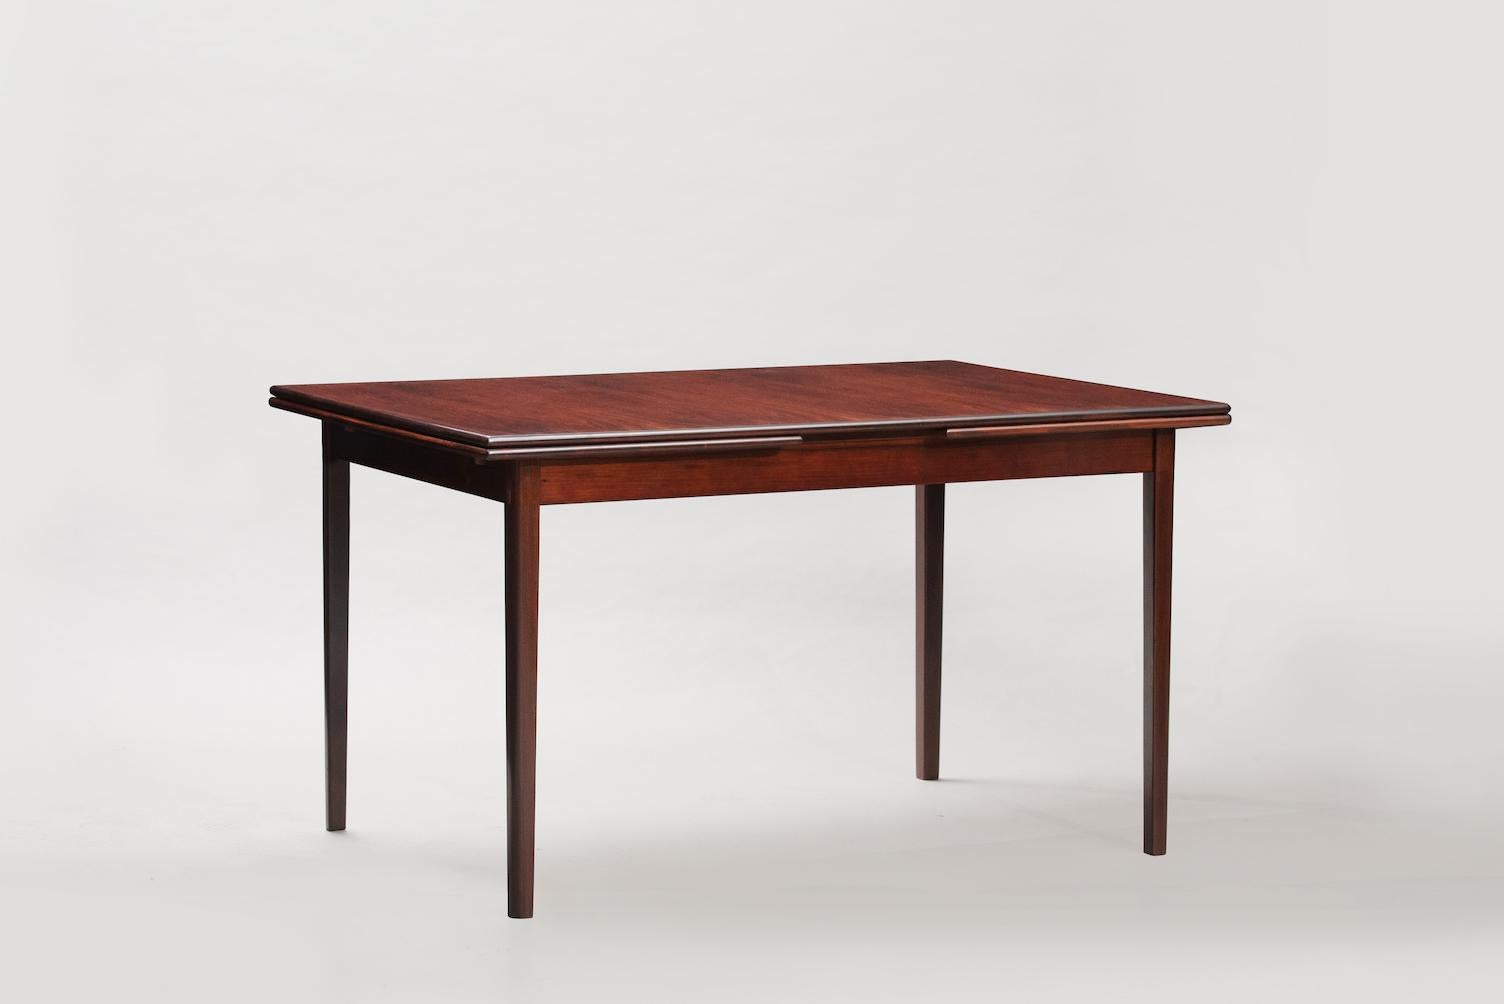 Rosewood Mid-Century Modern Danish extendable dining table
Measure: Width 130/235 cm.